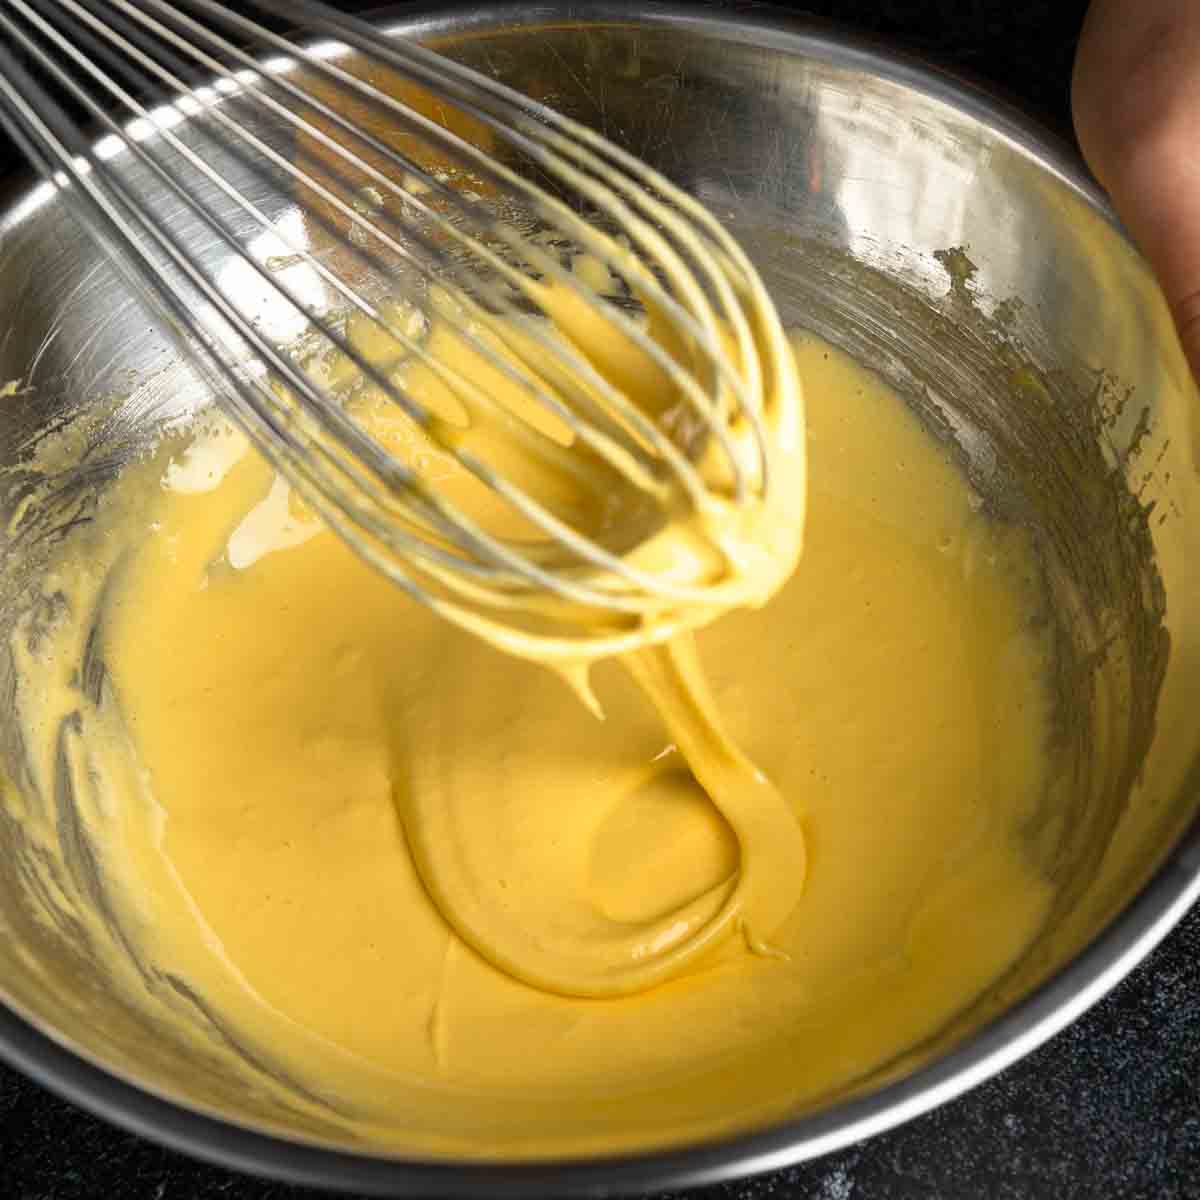 Whisked eggs and sugar falling from the whisk in ribbons